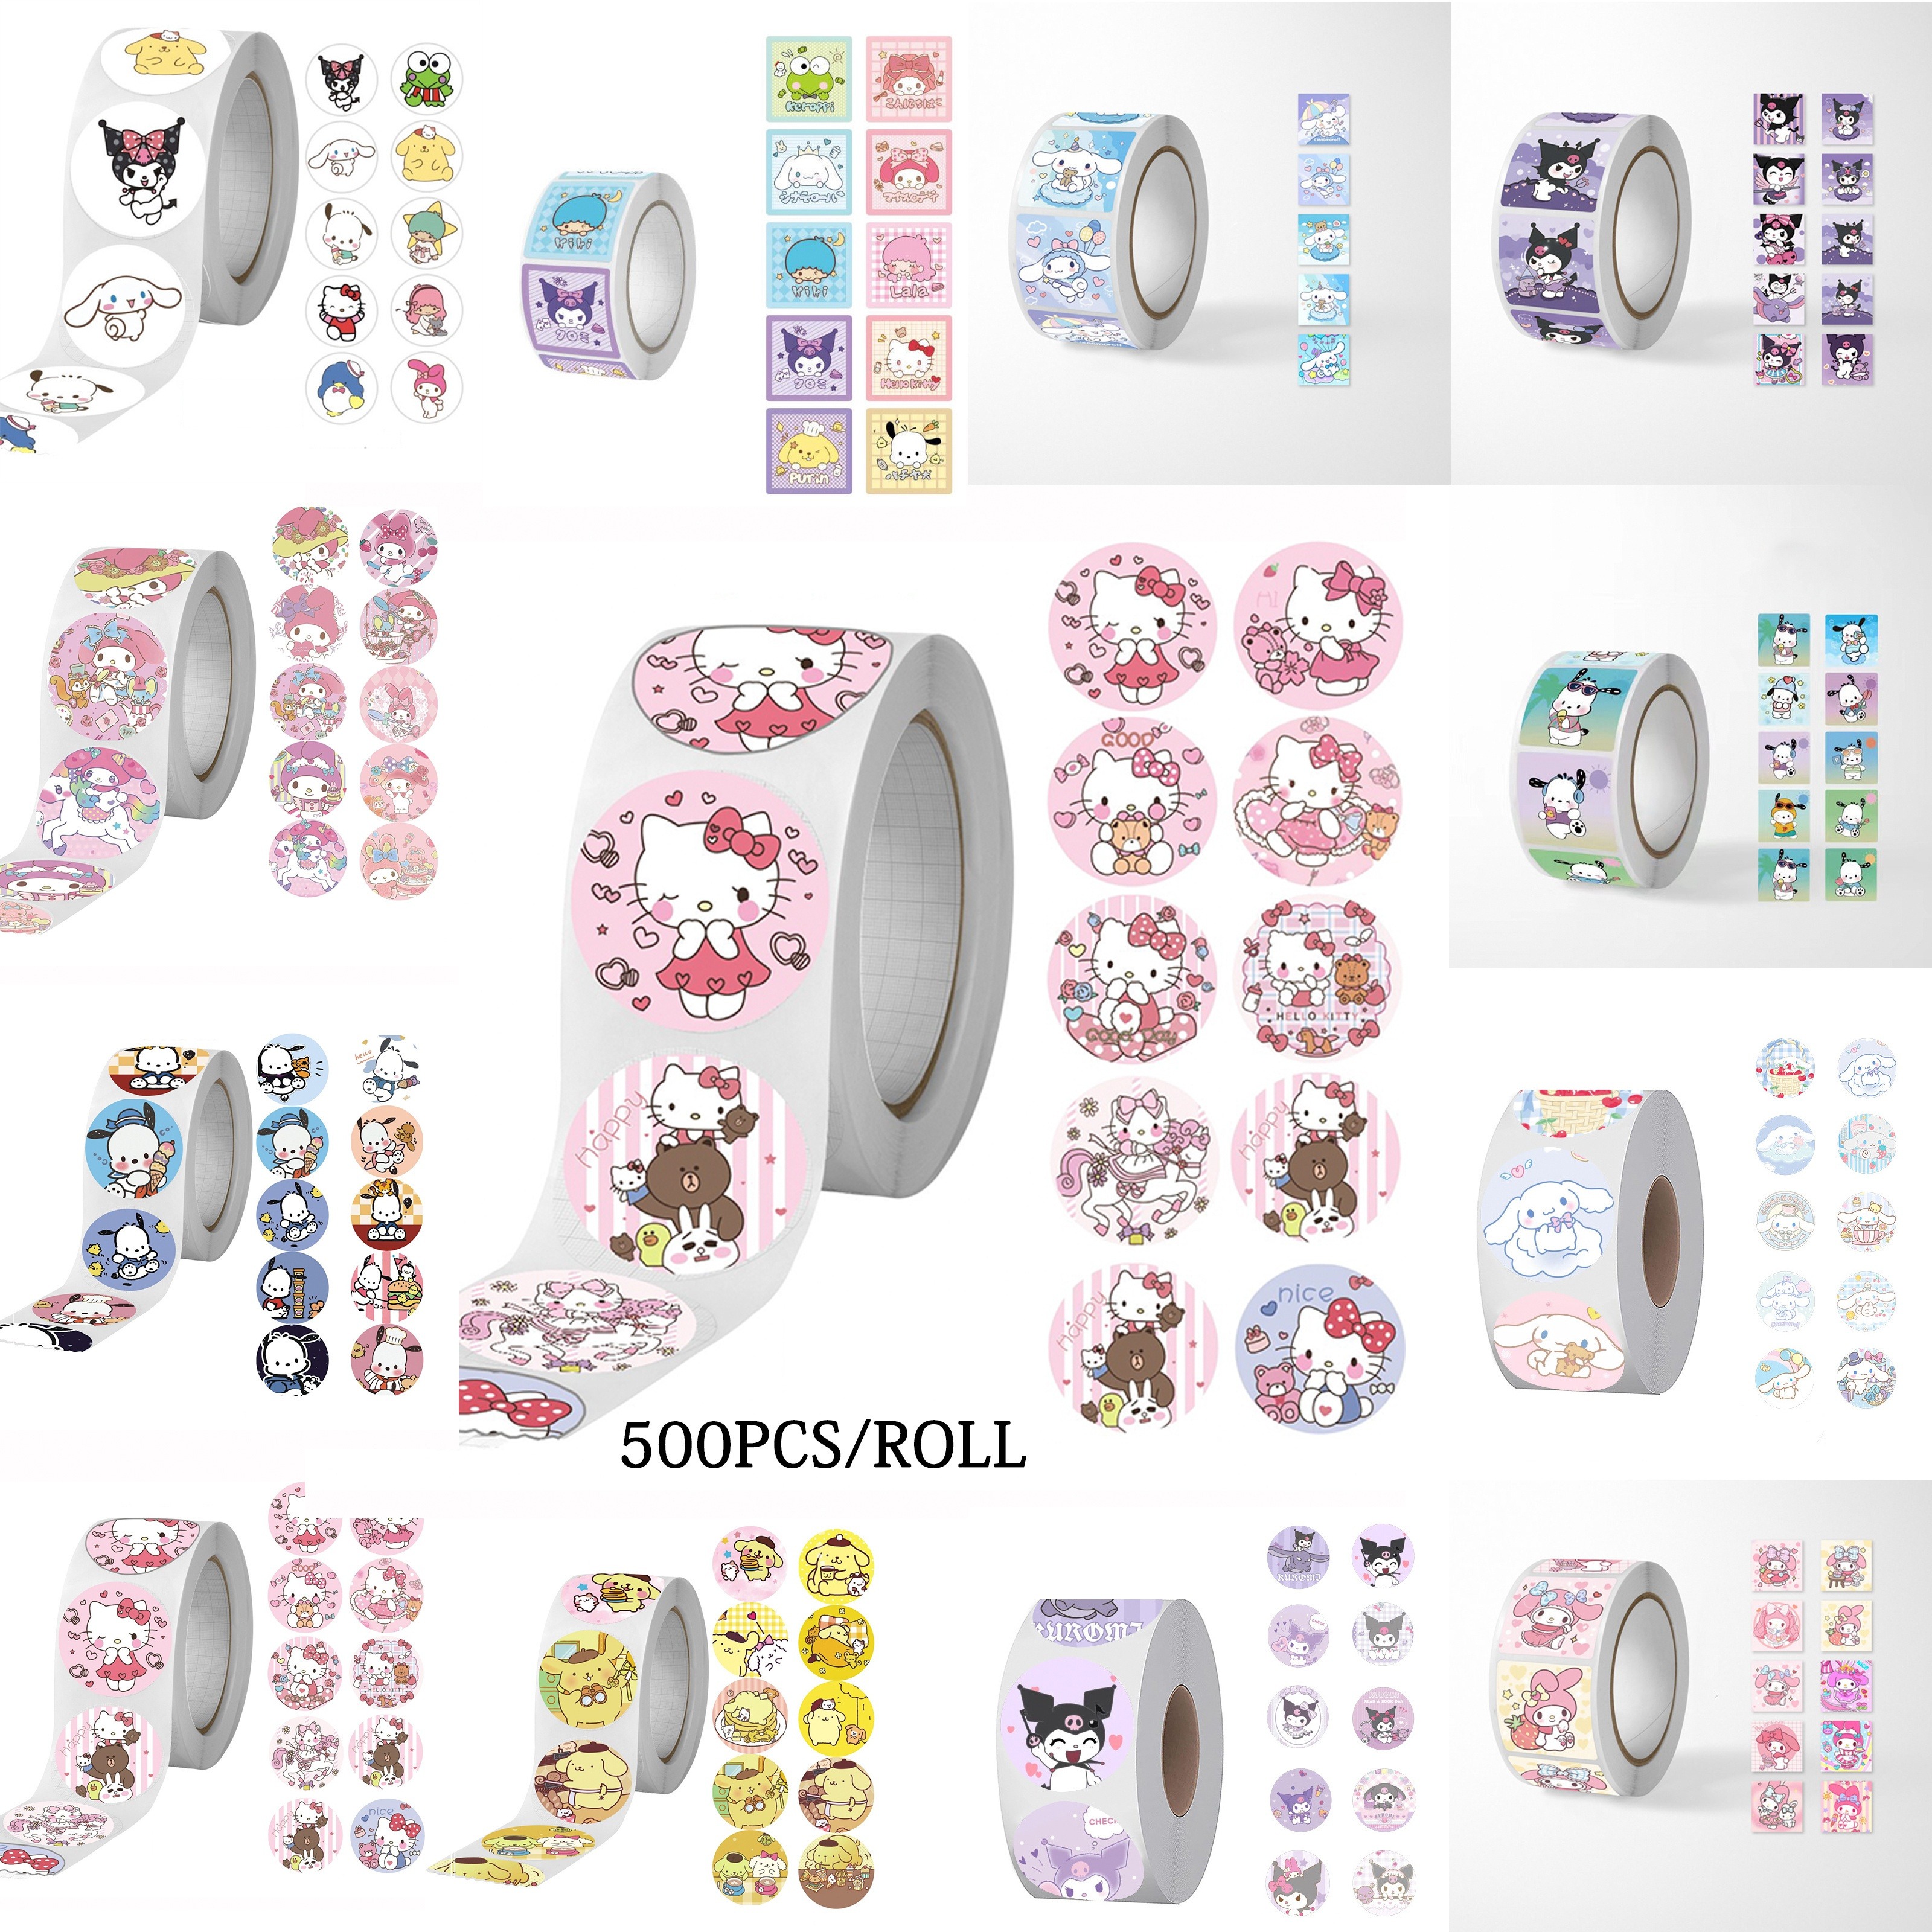 

500pcs/roll Hellokitty Stickers Melody Stickers, Cute Cartoon Stickers For Laptop Cup Refrigerator Book Luggage Table Helmet Skateboard Camera Guitar, Diy Creative Stickers